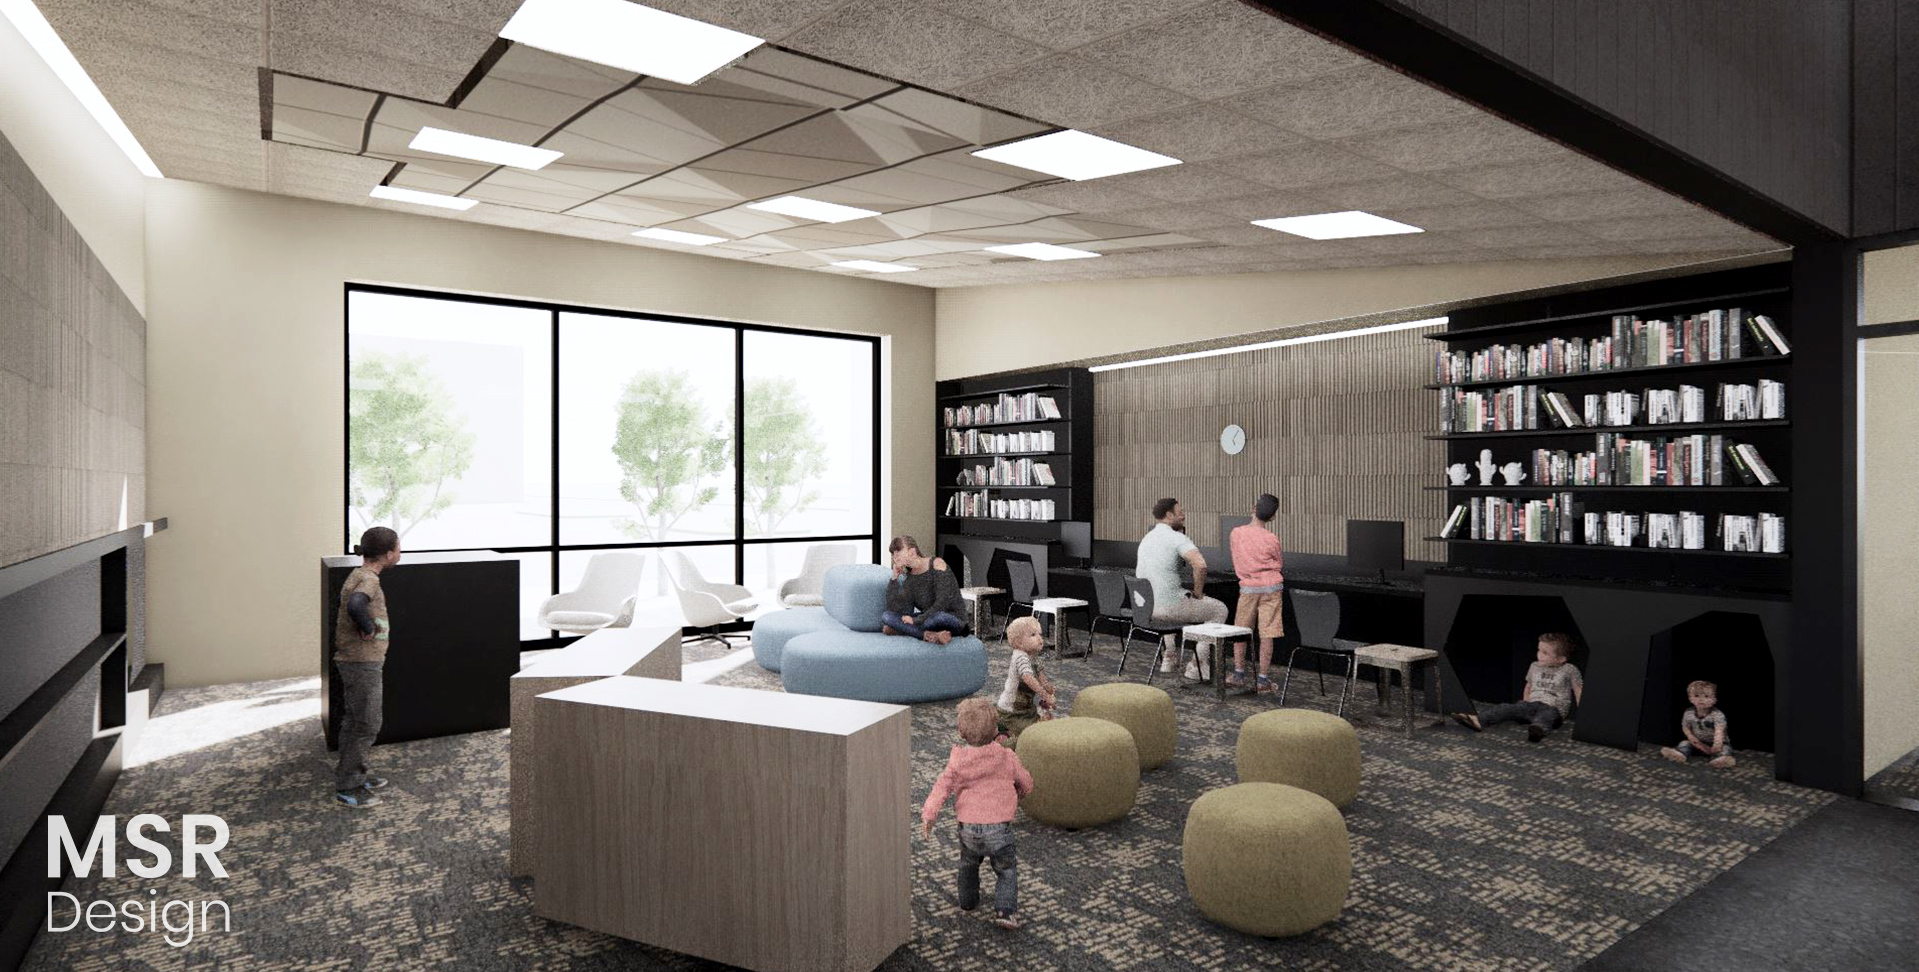 Rendering of the Active Child Space